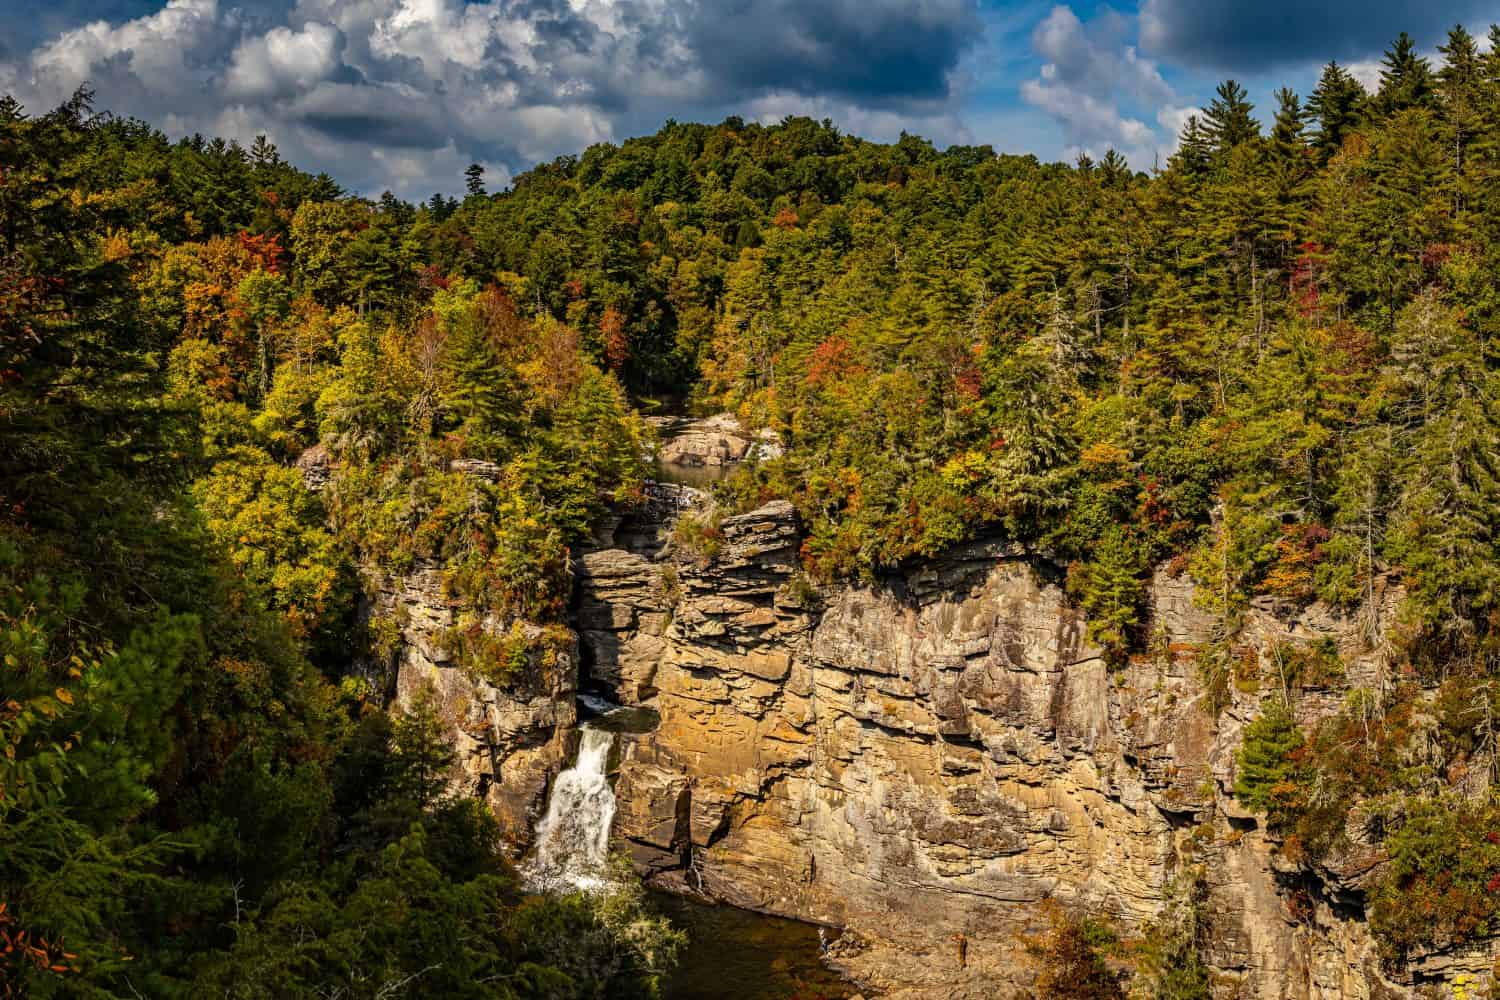 Linville Falls is the most famous and popular waterfall in the Blue Ridge Mountains owing largely to its proximity to the Blue Ridge Parkway.